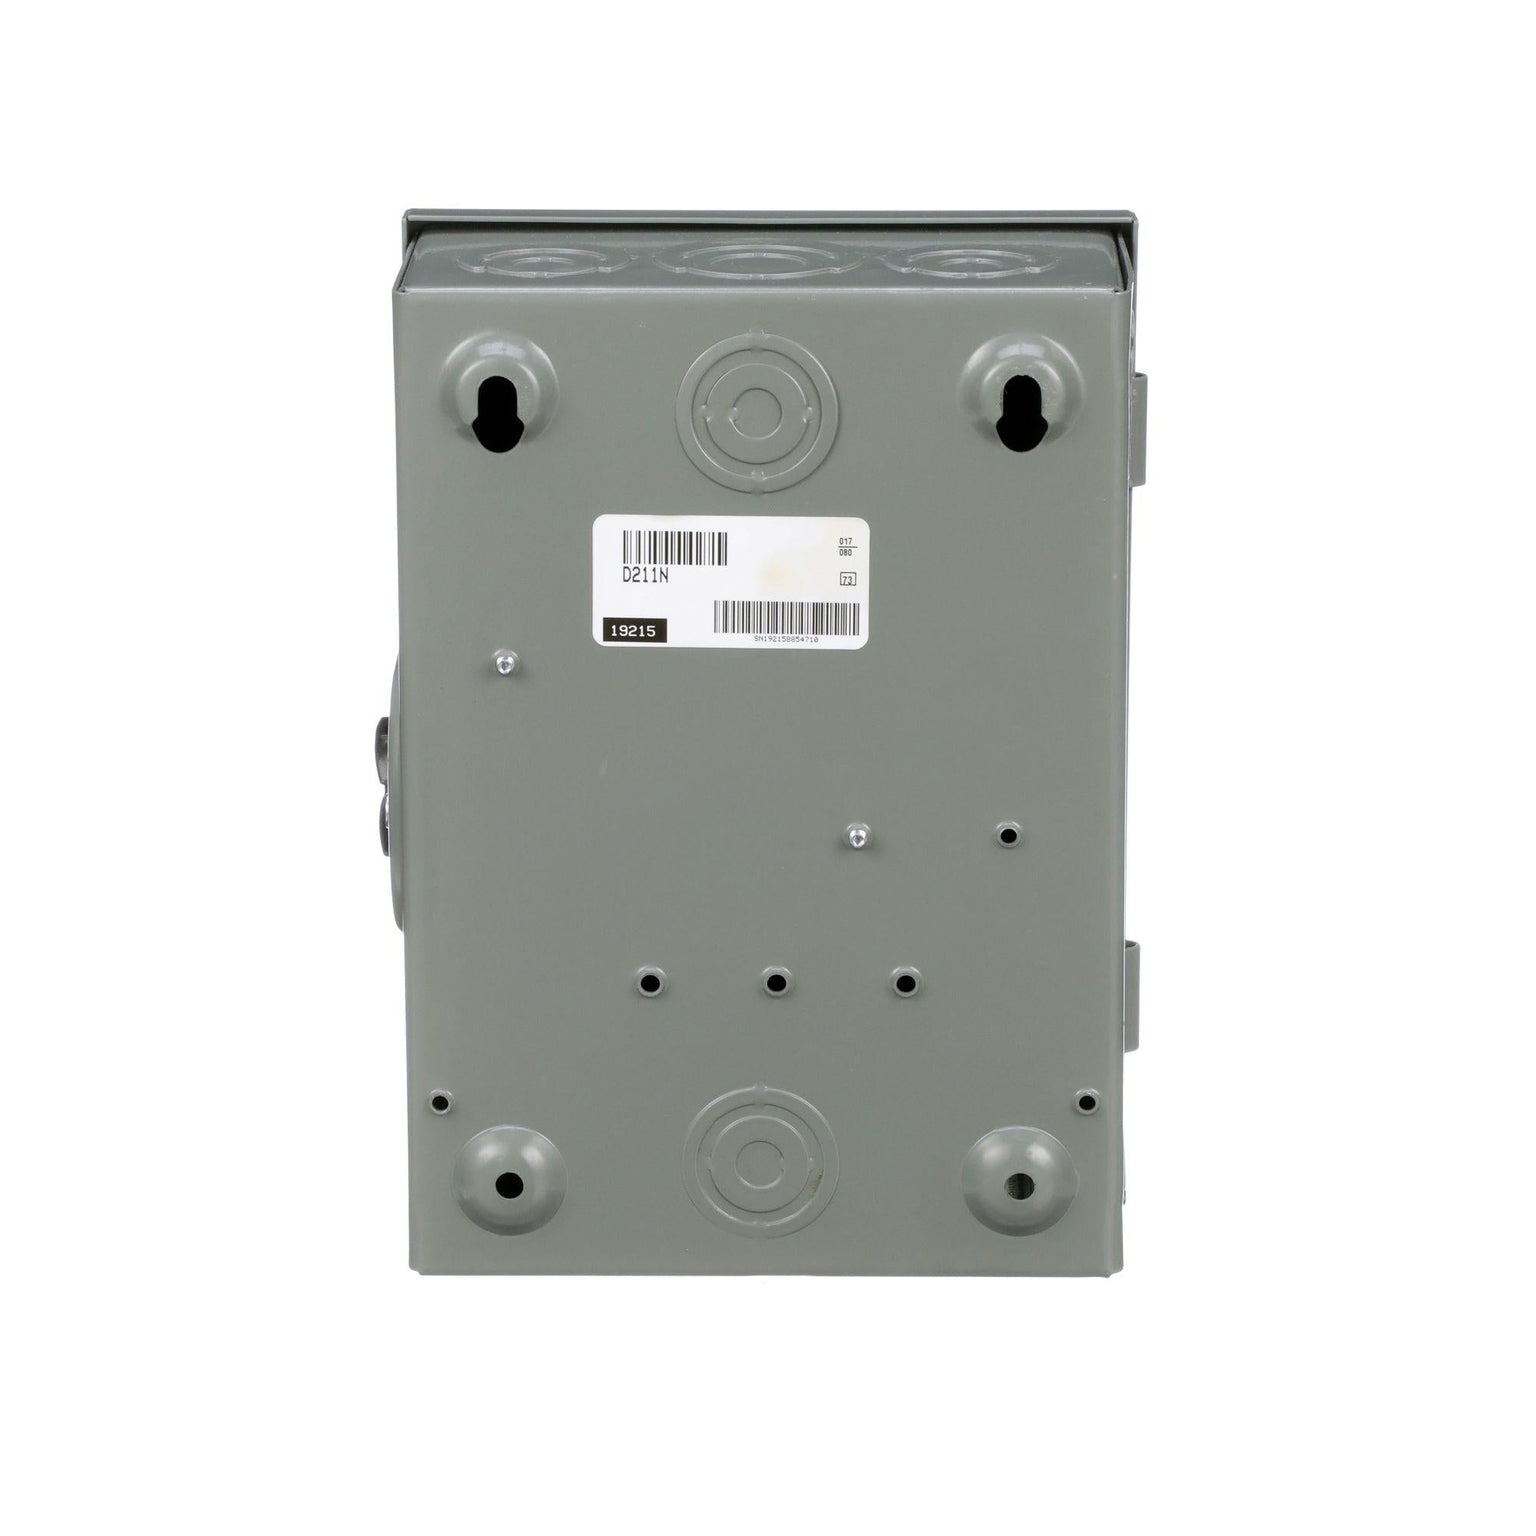 D211N - Square D - Safety Interlock Switch